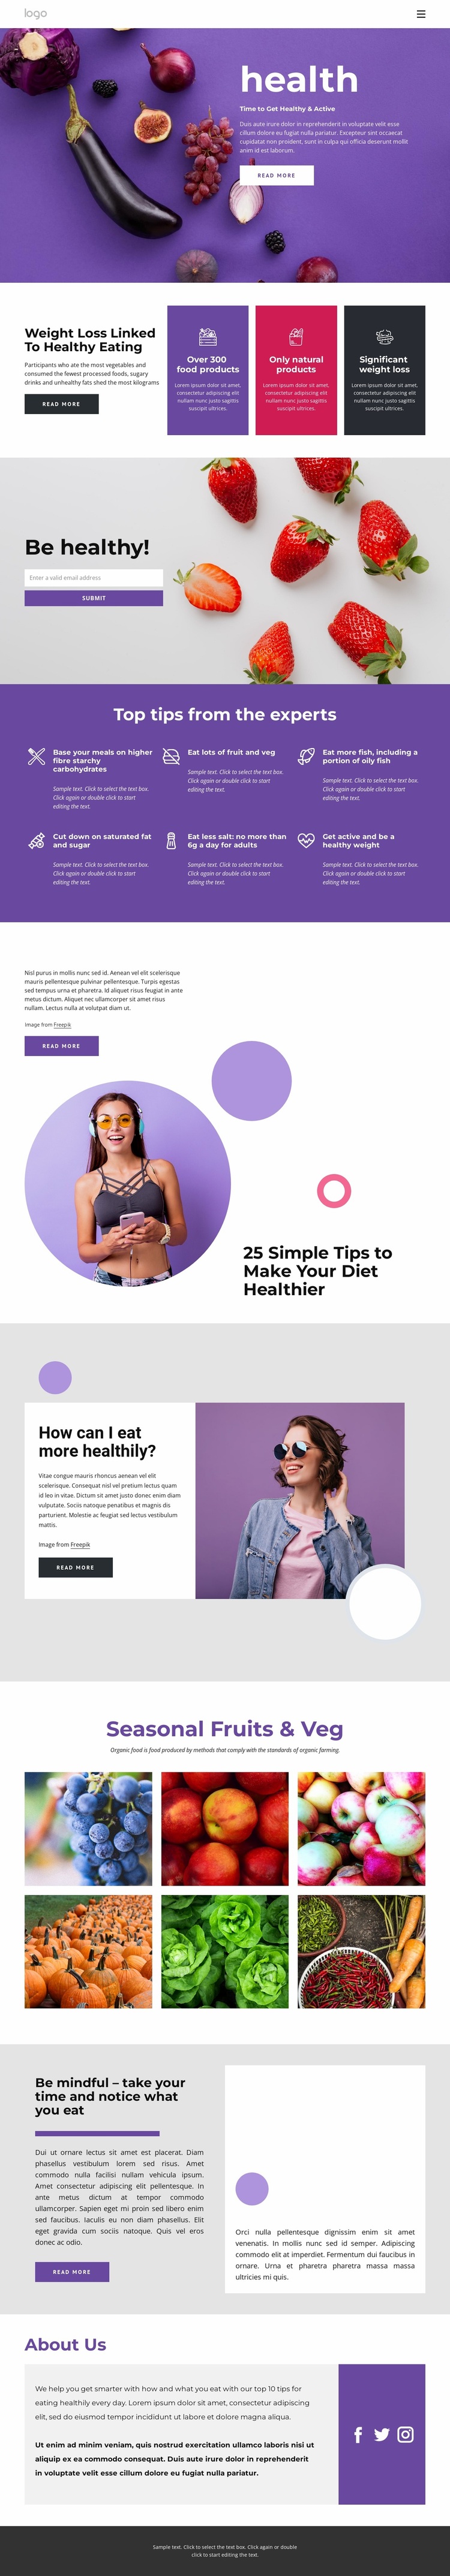 Building a healthy and balanced diet Website Design